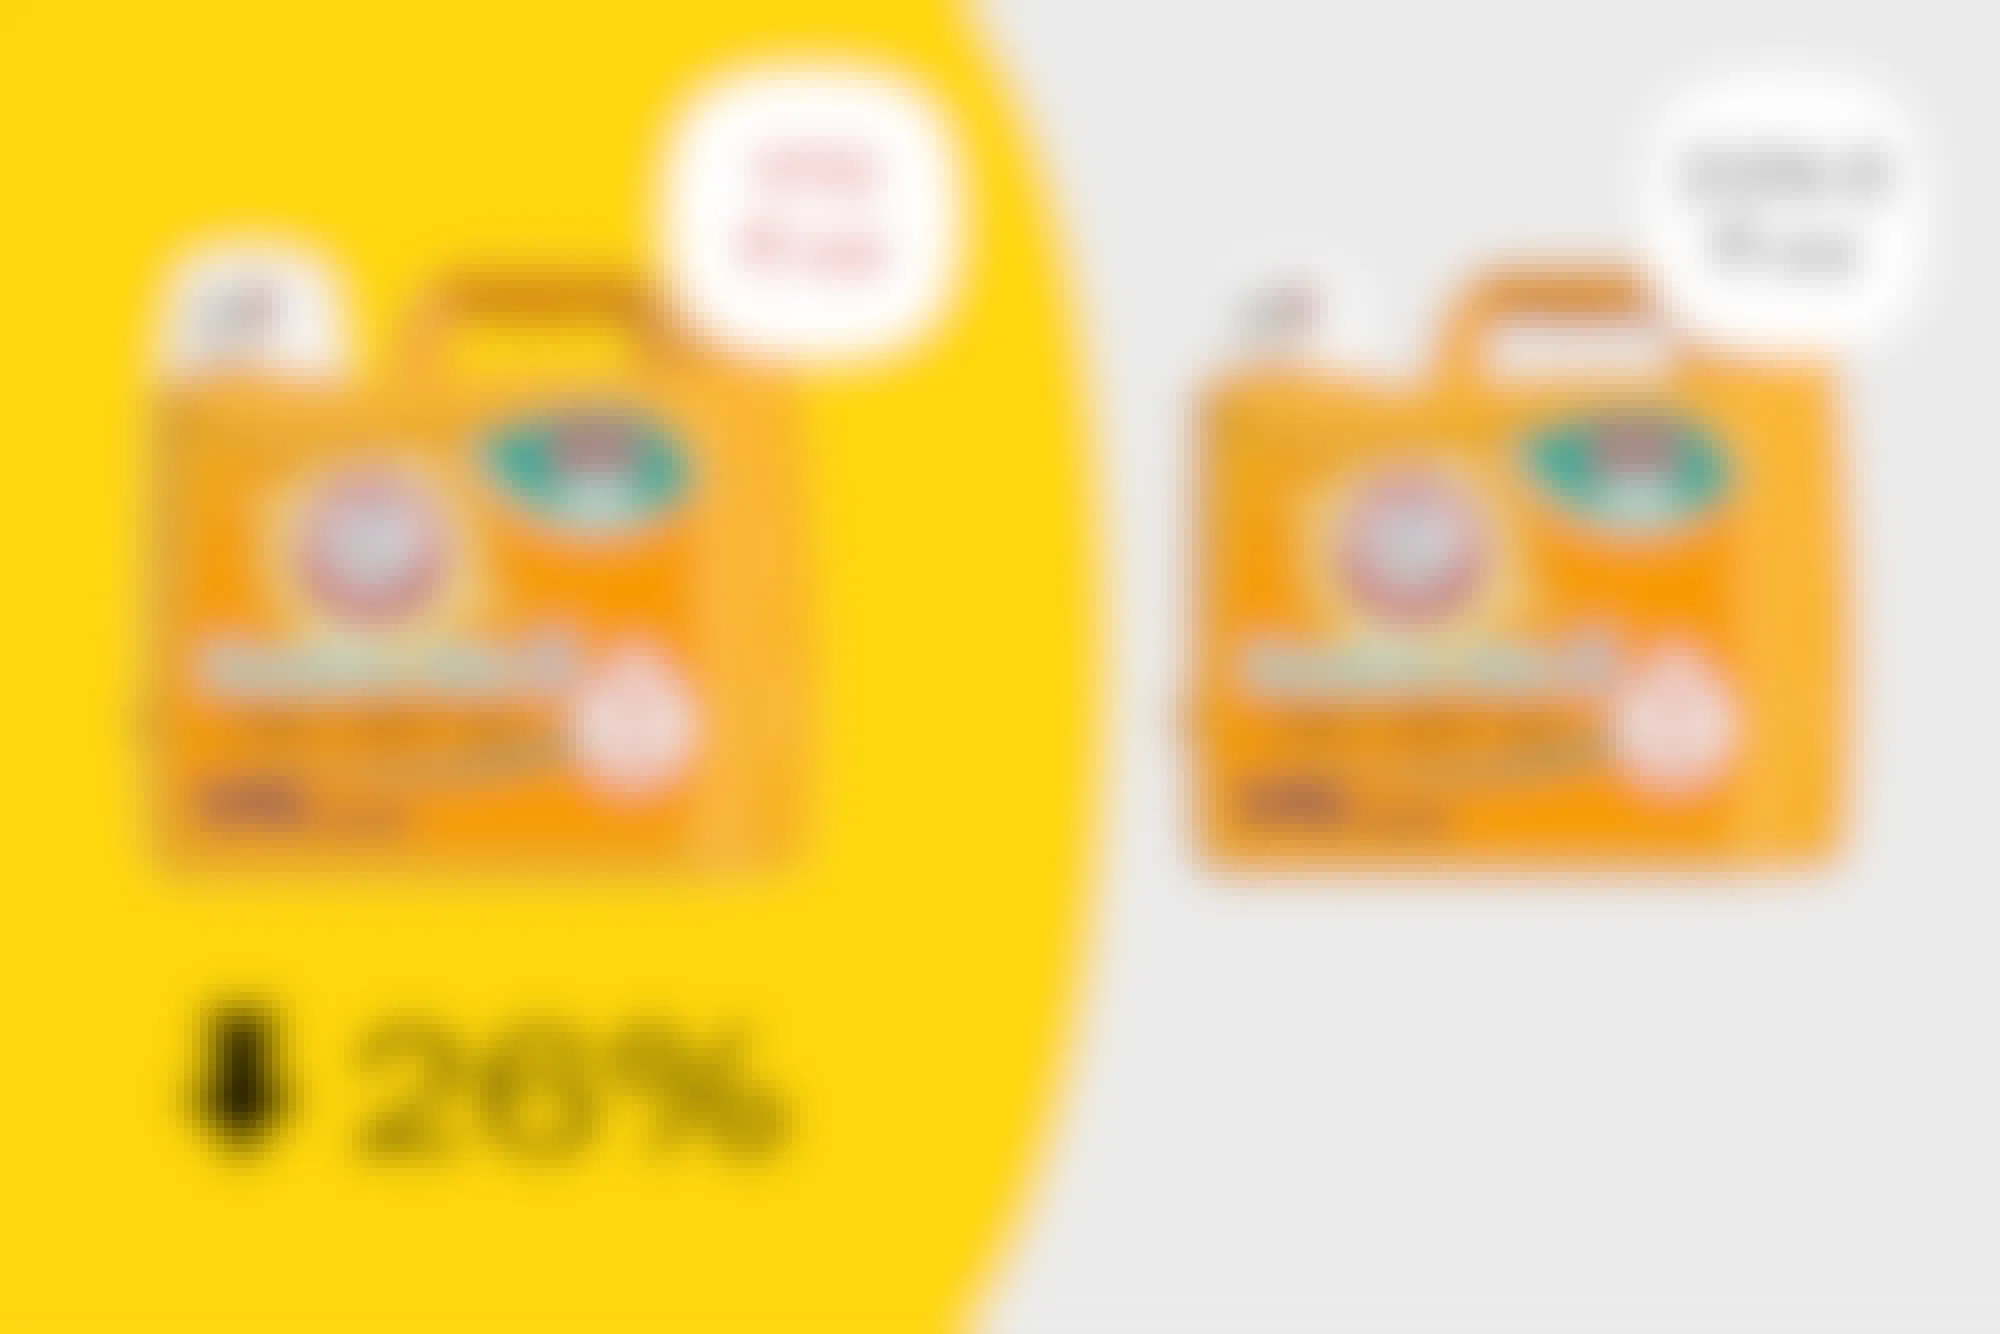 Graphic showing how Arm & Hammer detergent is 26% smaller thanks to shrinkflation